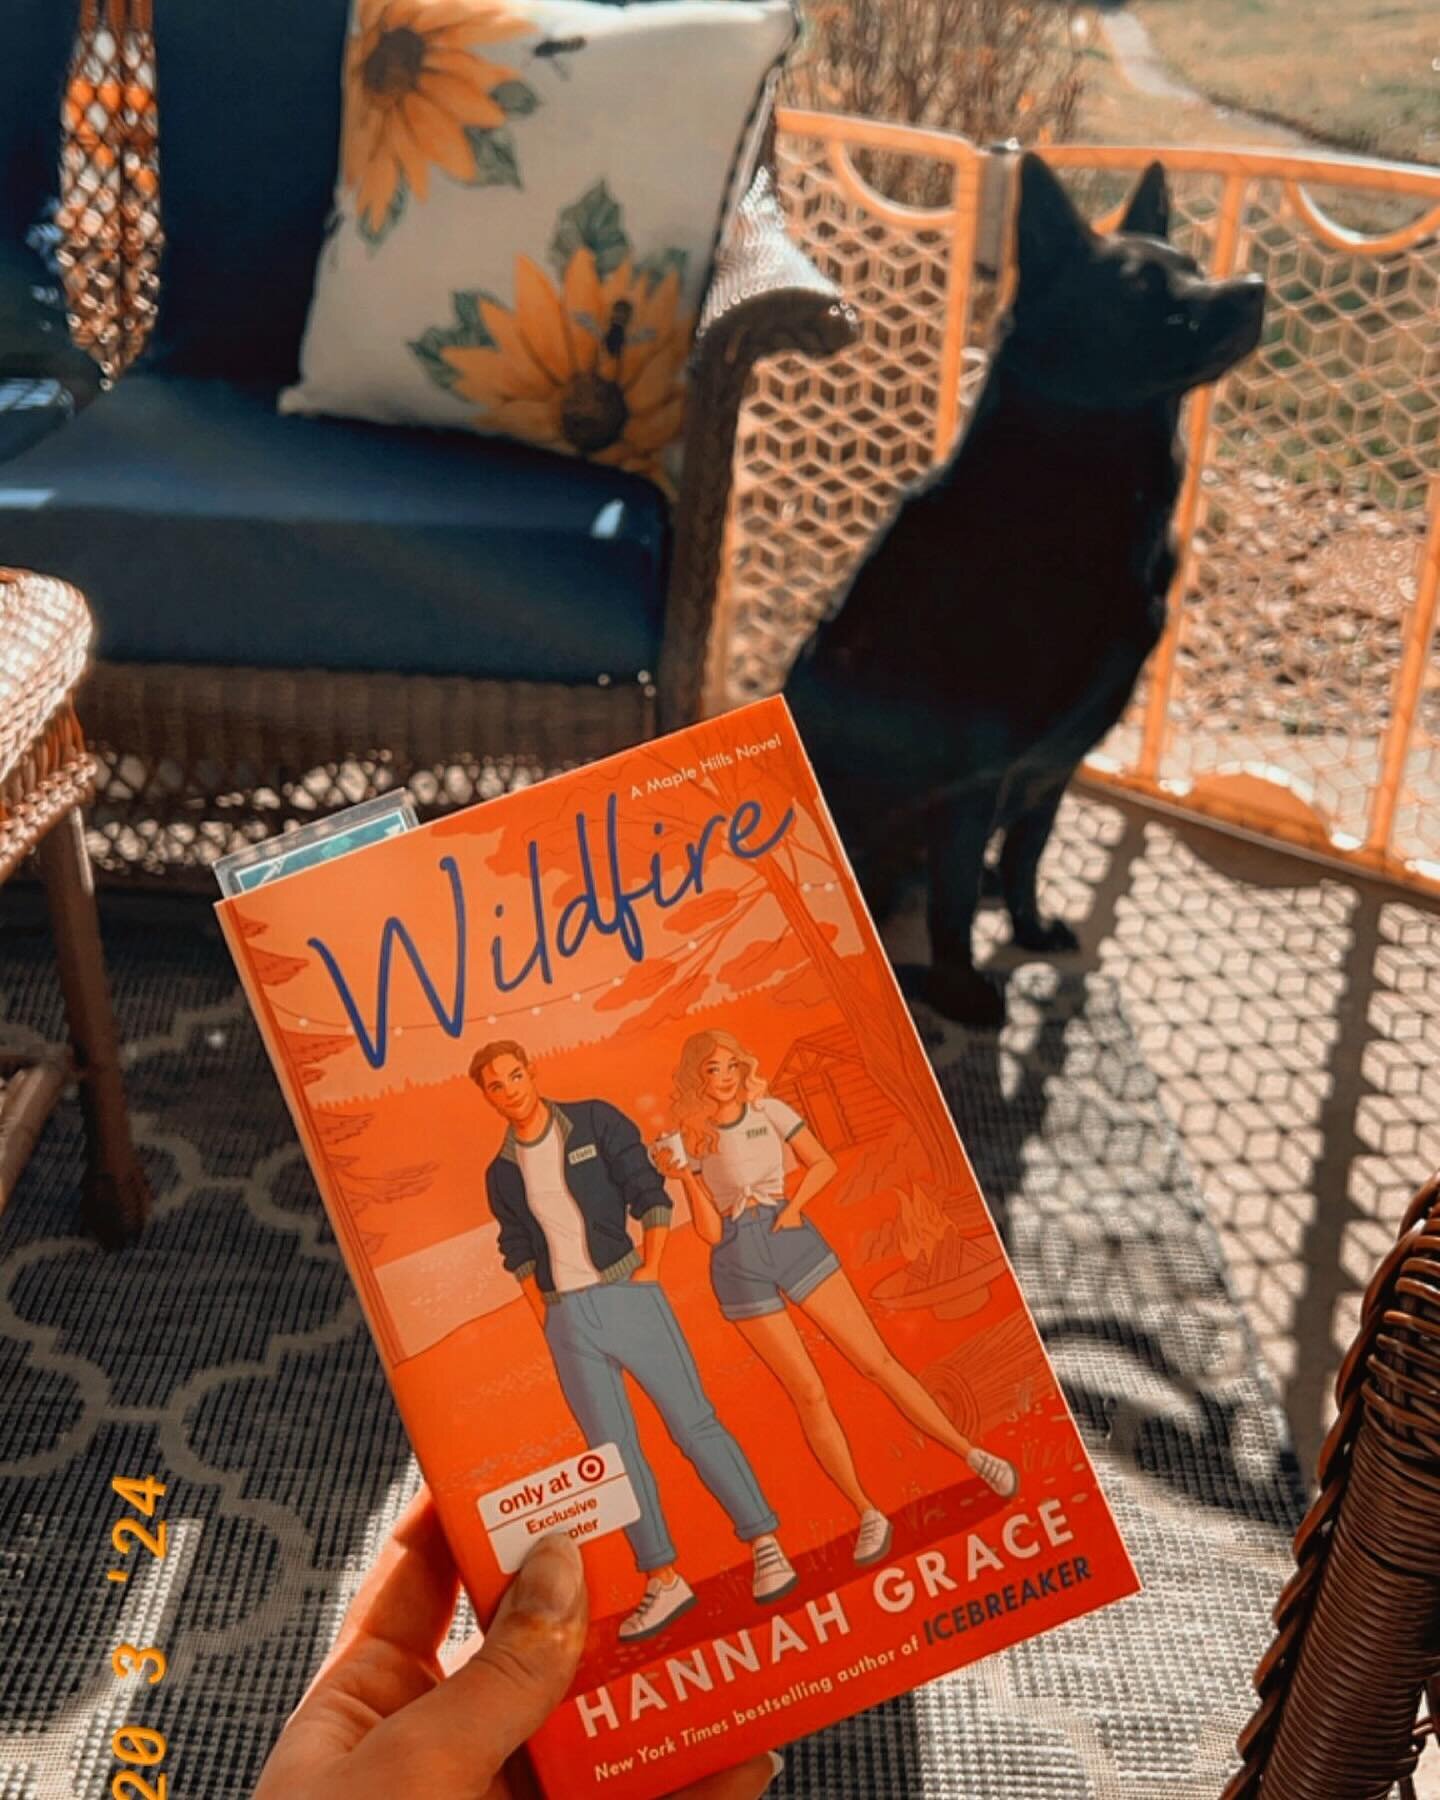 My #currentread is Wildfire by Hannah Grace ☀️💘📖

I read a lot of fantasy to catch up on the Crescent City series in time for book 3 to drop, so now I&rsquo;m in need of some fluff. This one is already off to a great start! 

XO,
Ashley